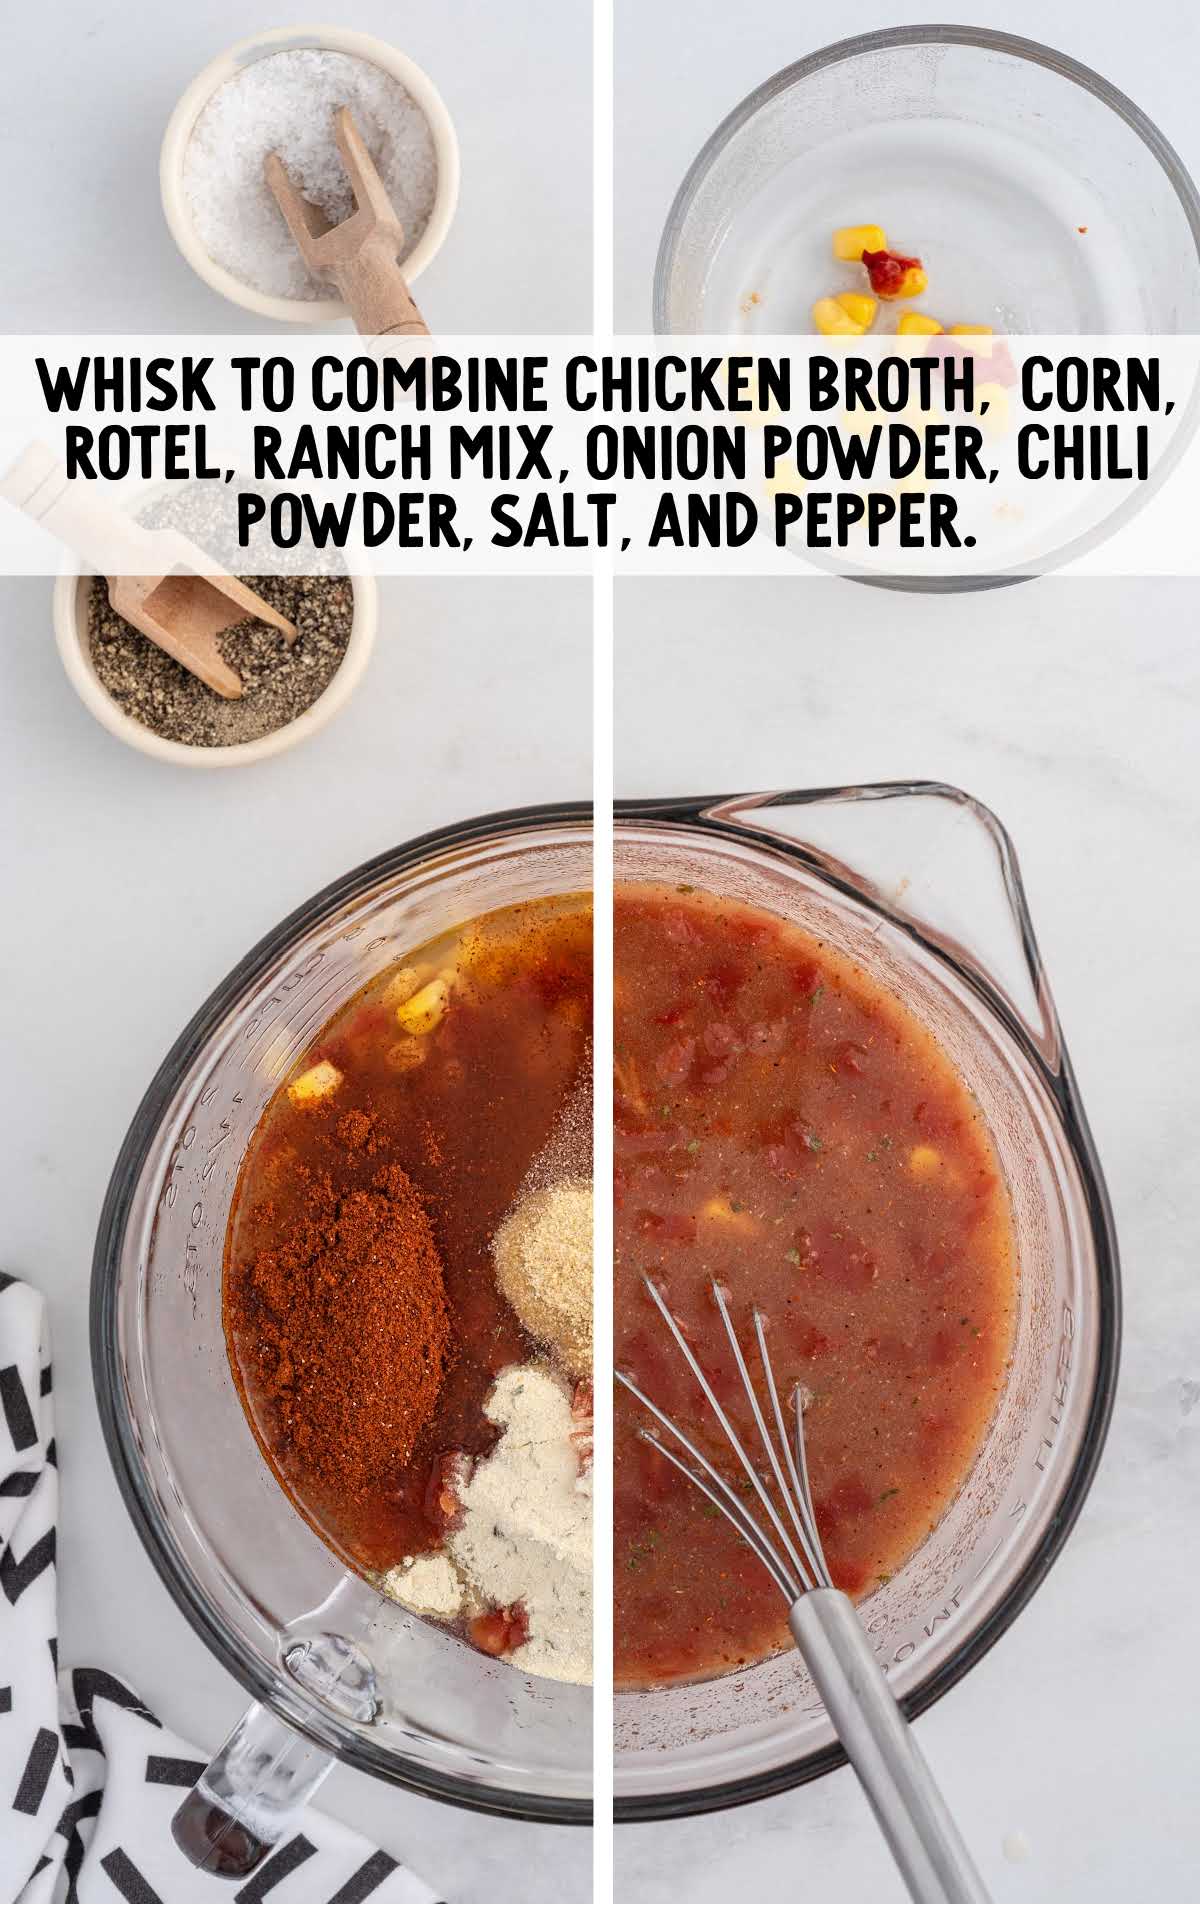 chicken broth, corn, rotel, ranch mix, onion powder, chili powder, salt, and pepper whisked in a cup